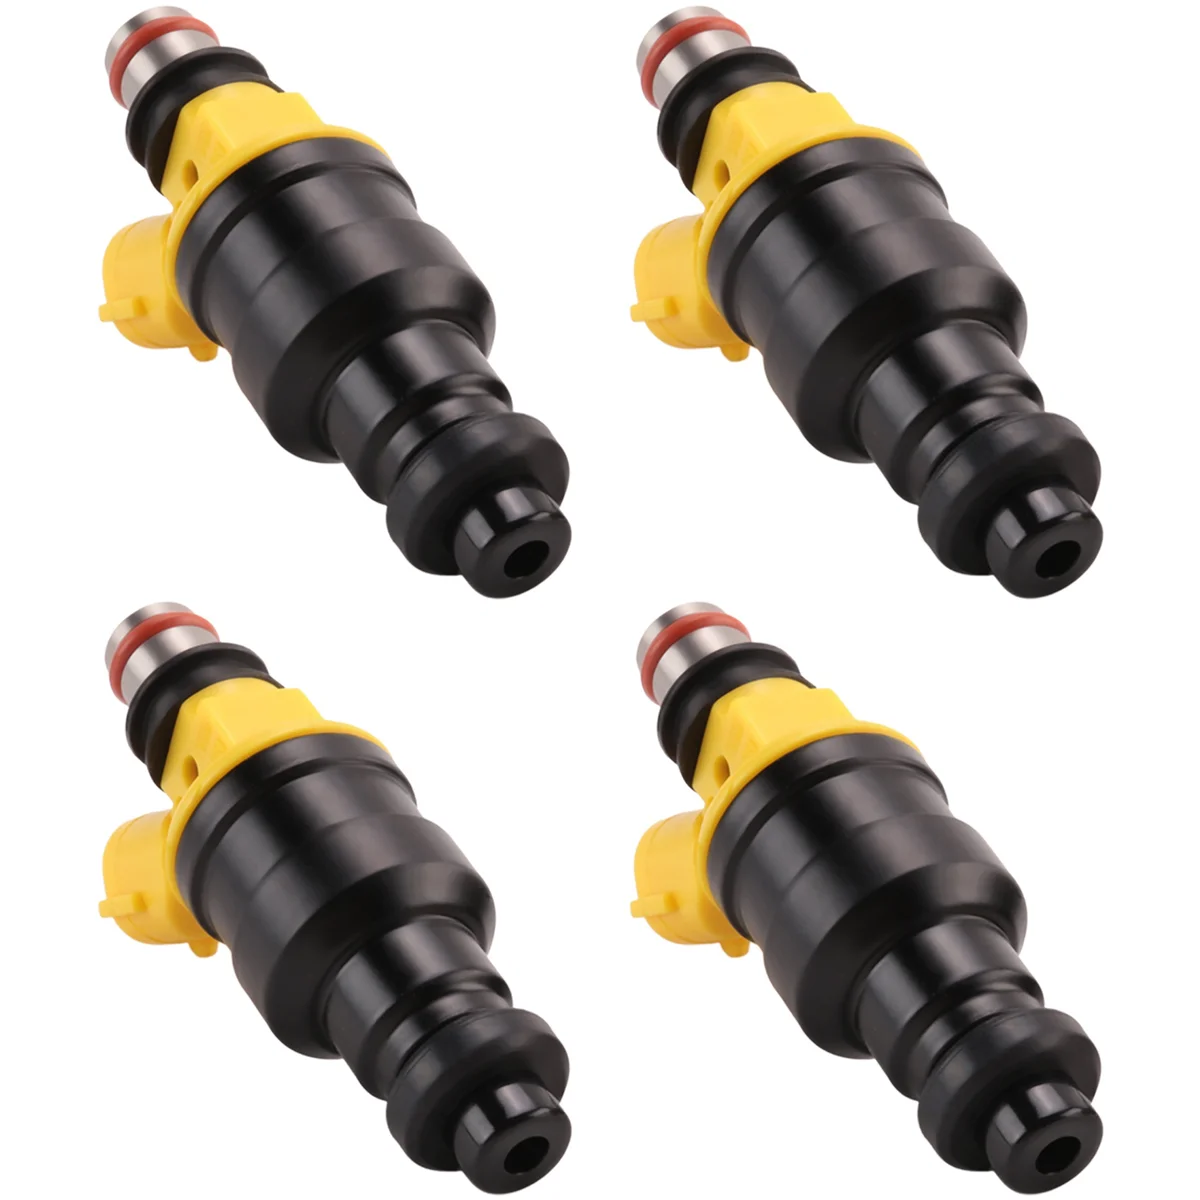 

4Pcs Fuel Injectors 23250-02020 2325002020 for Toyota Cute 92-97 AT190 Avensis 97-00 IT